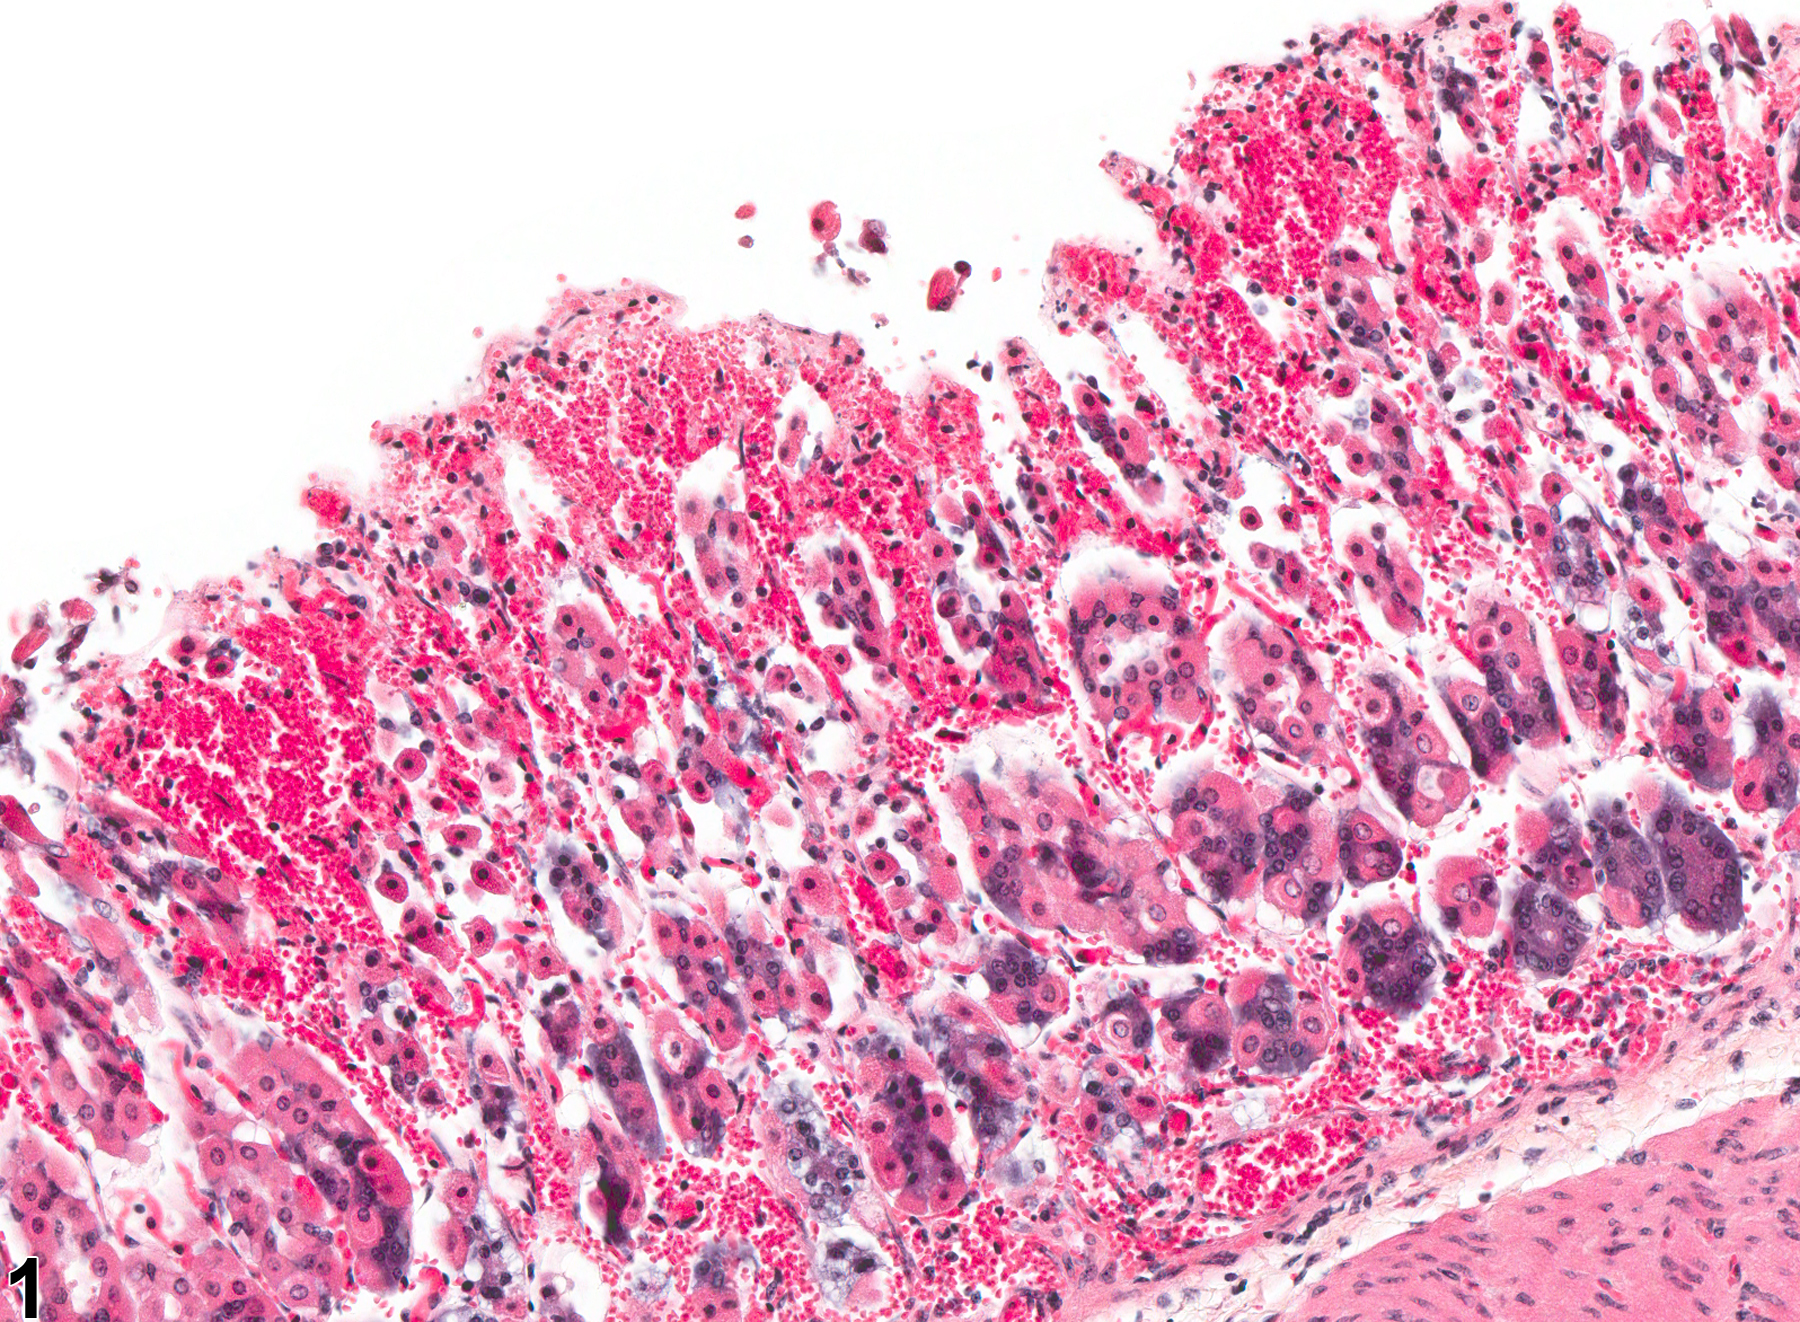 Image of hemorrhage in the glandular stomach from a female B6C3F1 mouse in a subchronic study